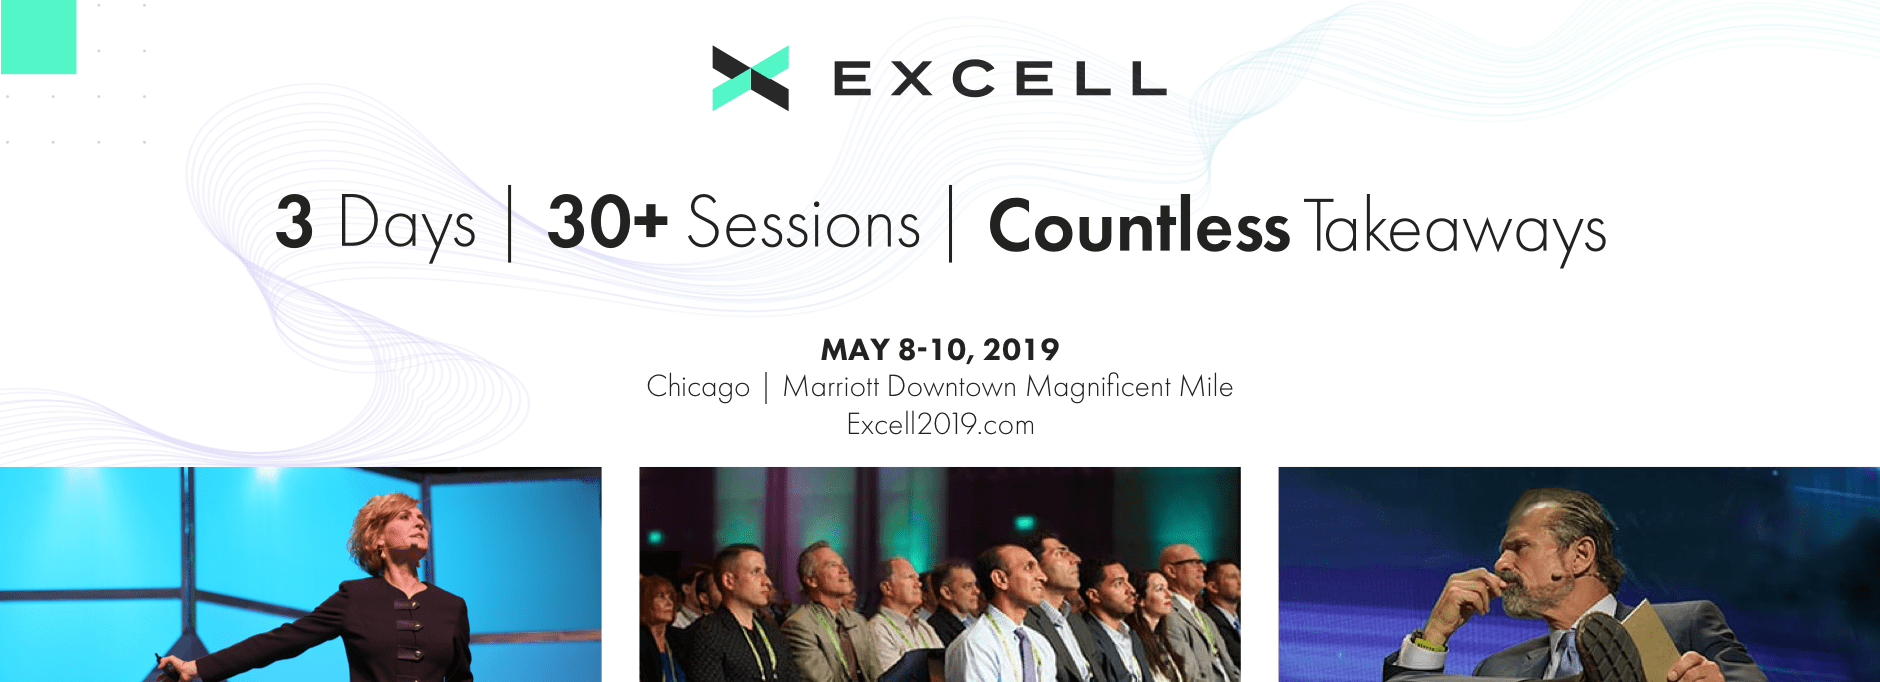 Excell 2019